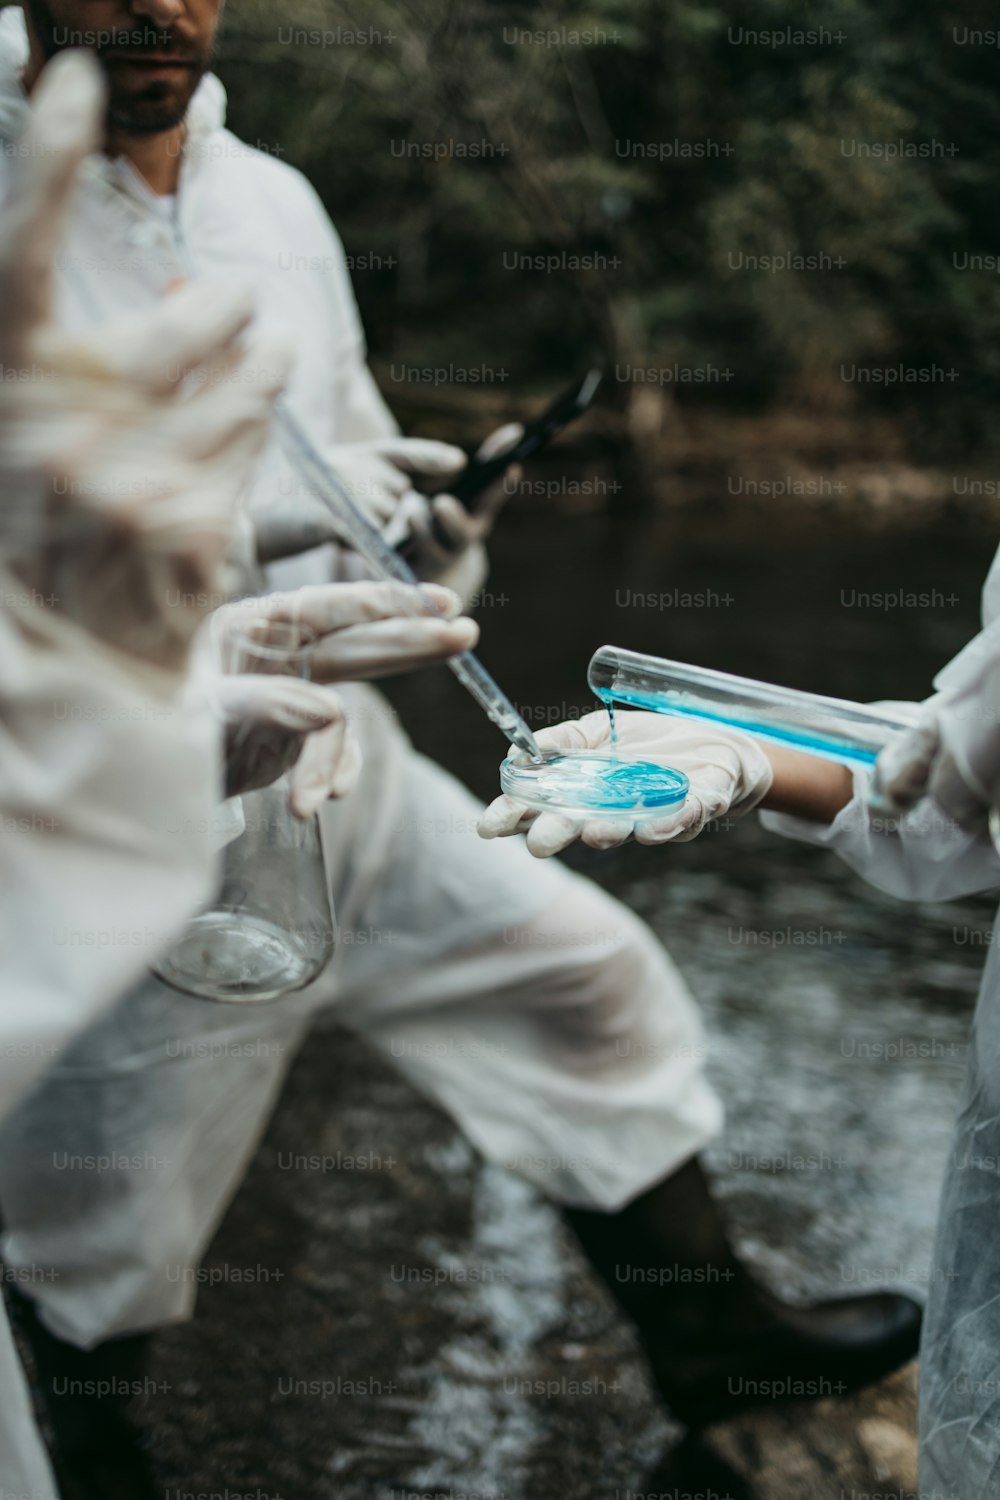 Team of scientists and biologists researching possibilities for bacteria and virus spreading through natural flowing supplies of drinking water.